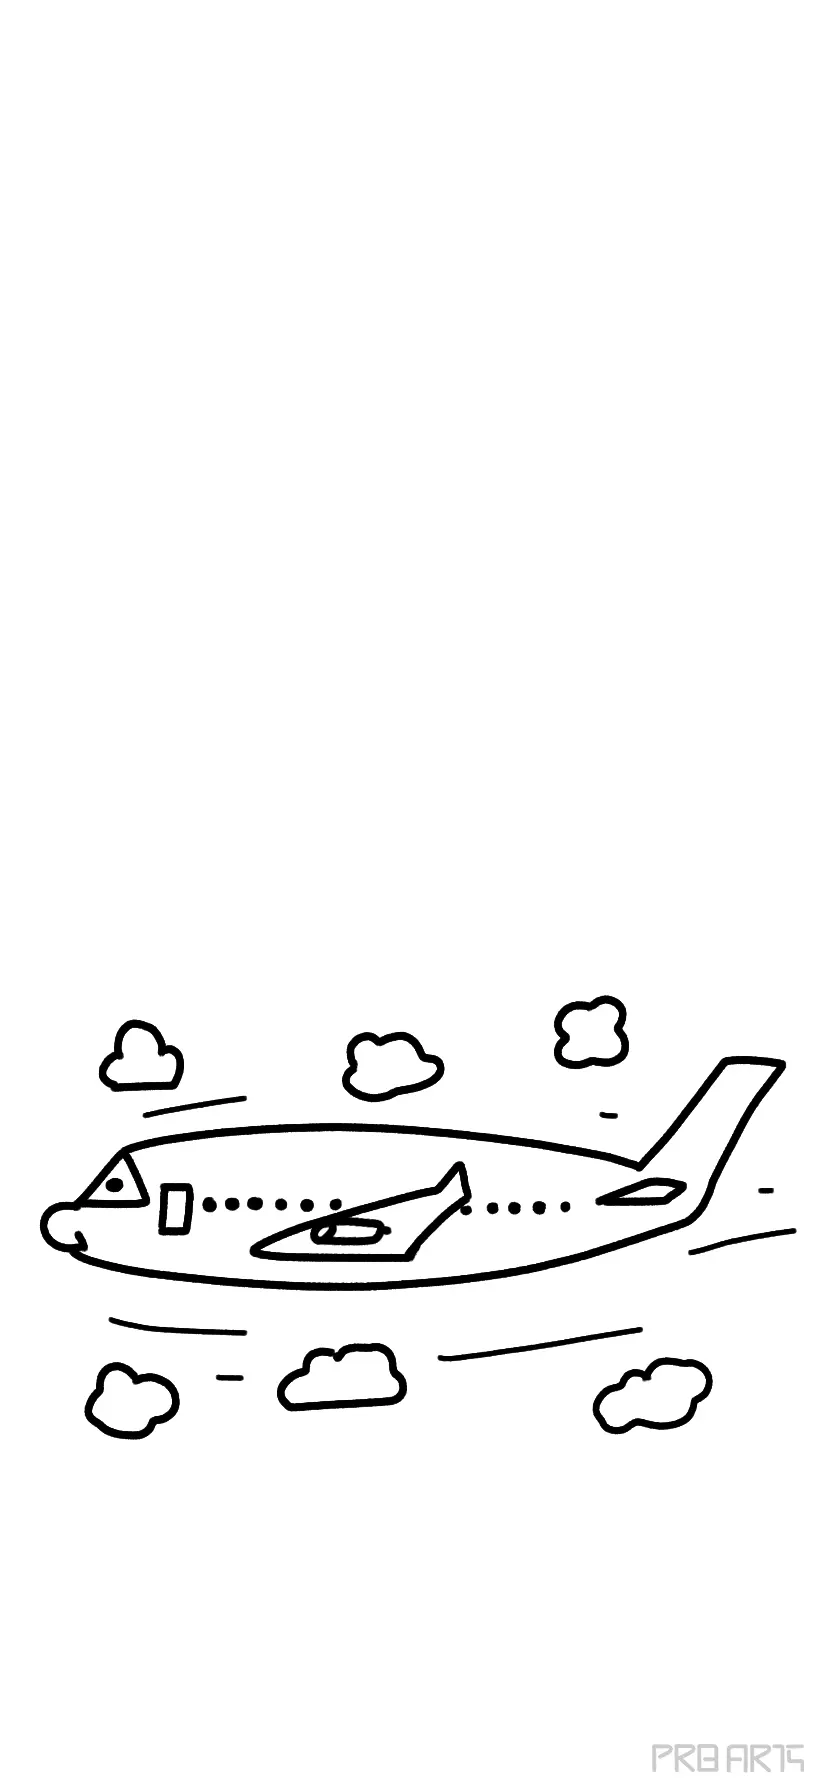 100000 Airplane sketch Vector Images  Depositphotos